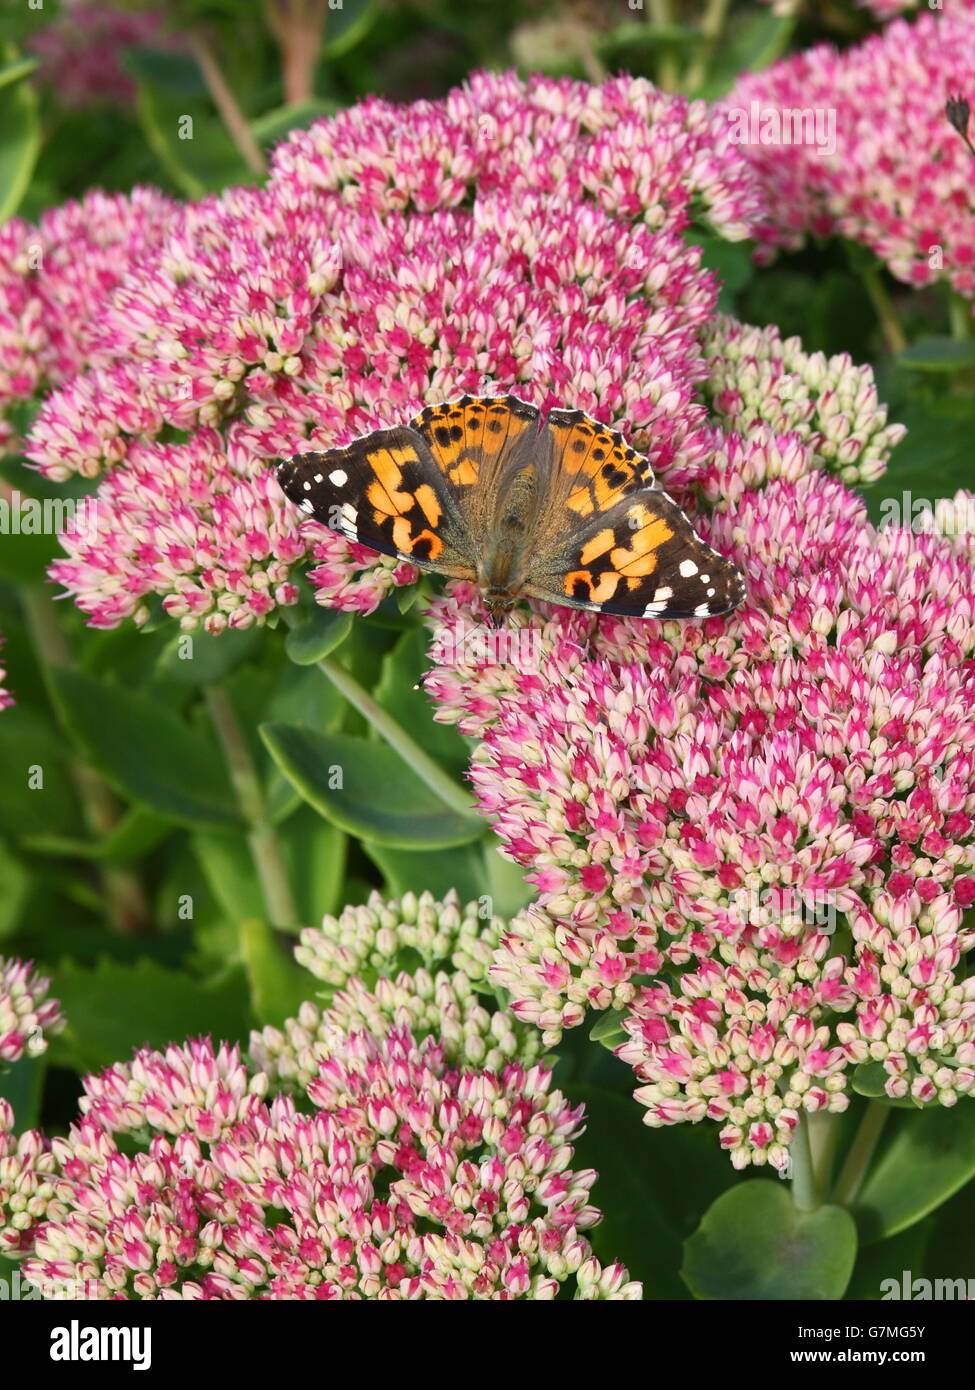 A Painted lady butterfly, Cynthia cardui, rests on the pink flowers of a Sedum spectabile plant in a summer garden. Stock Photo